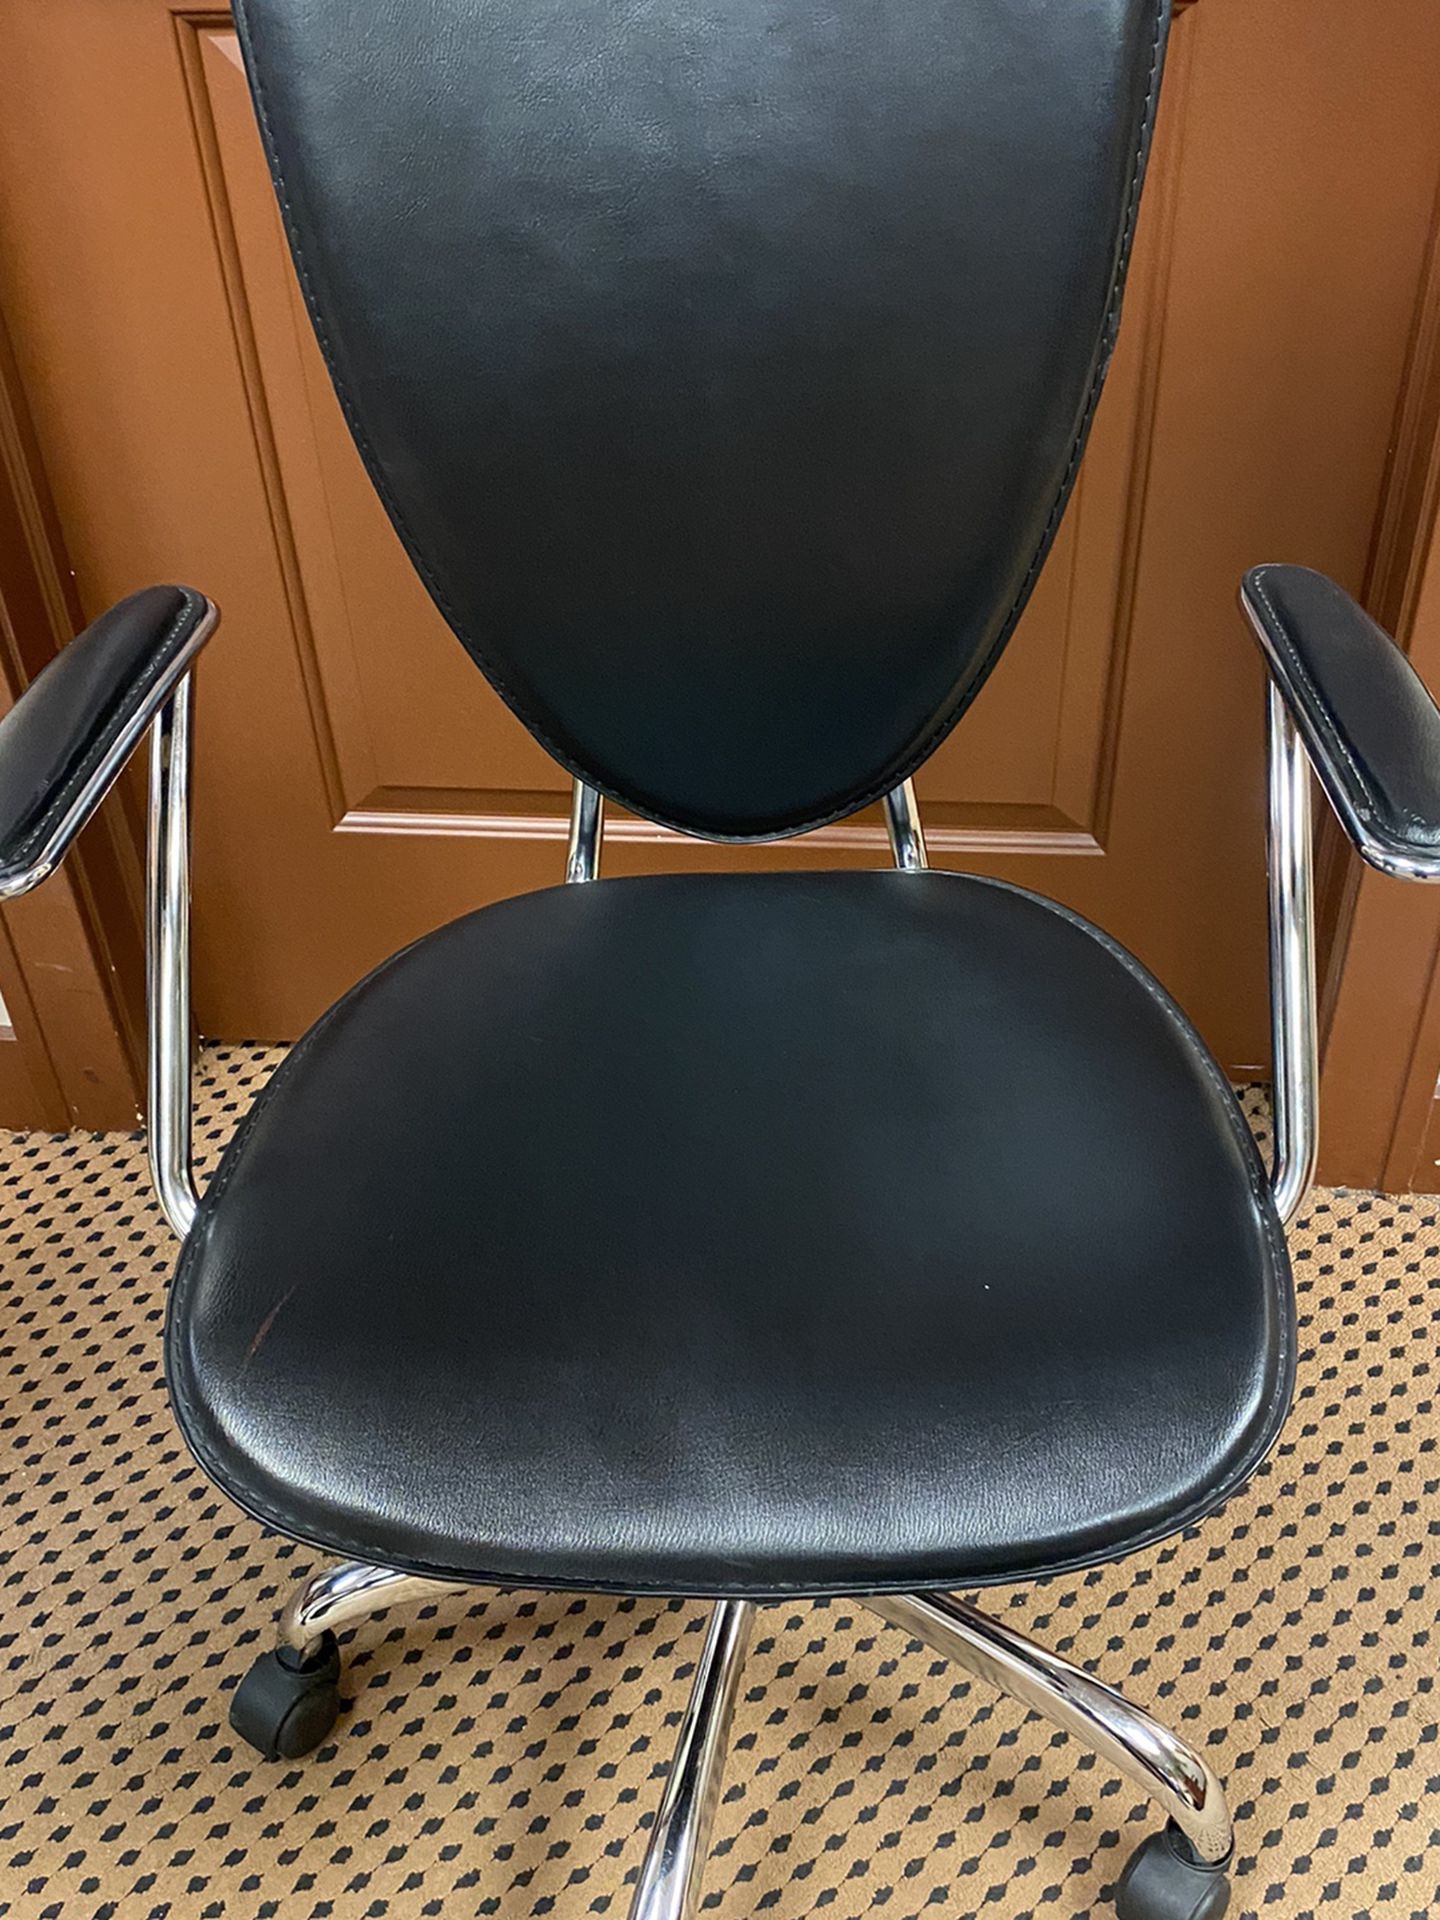 Office Task Chair $40